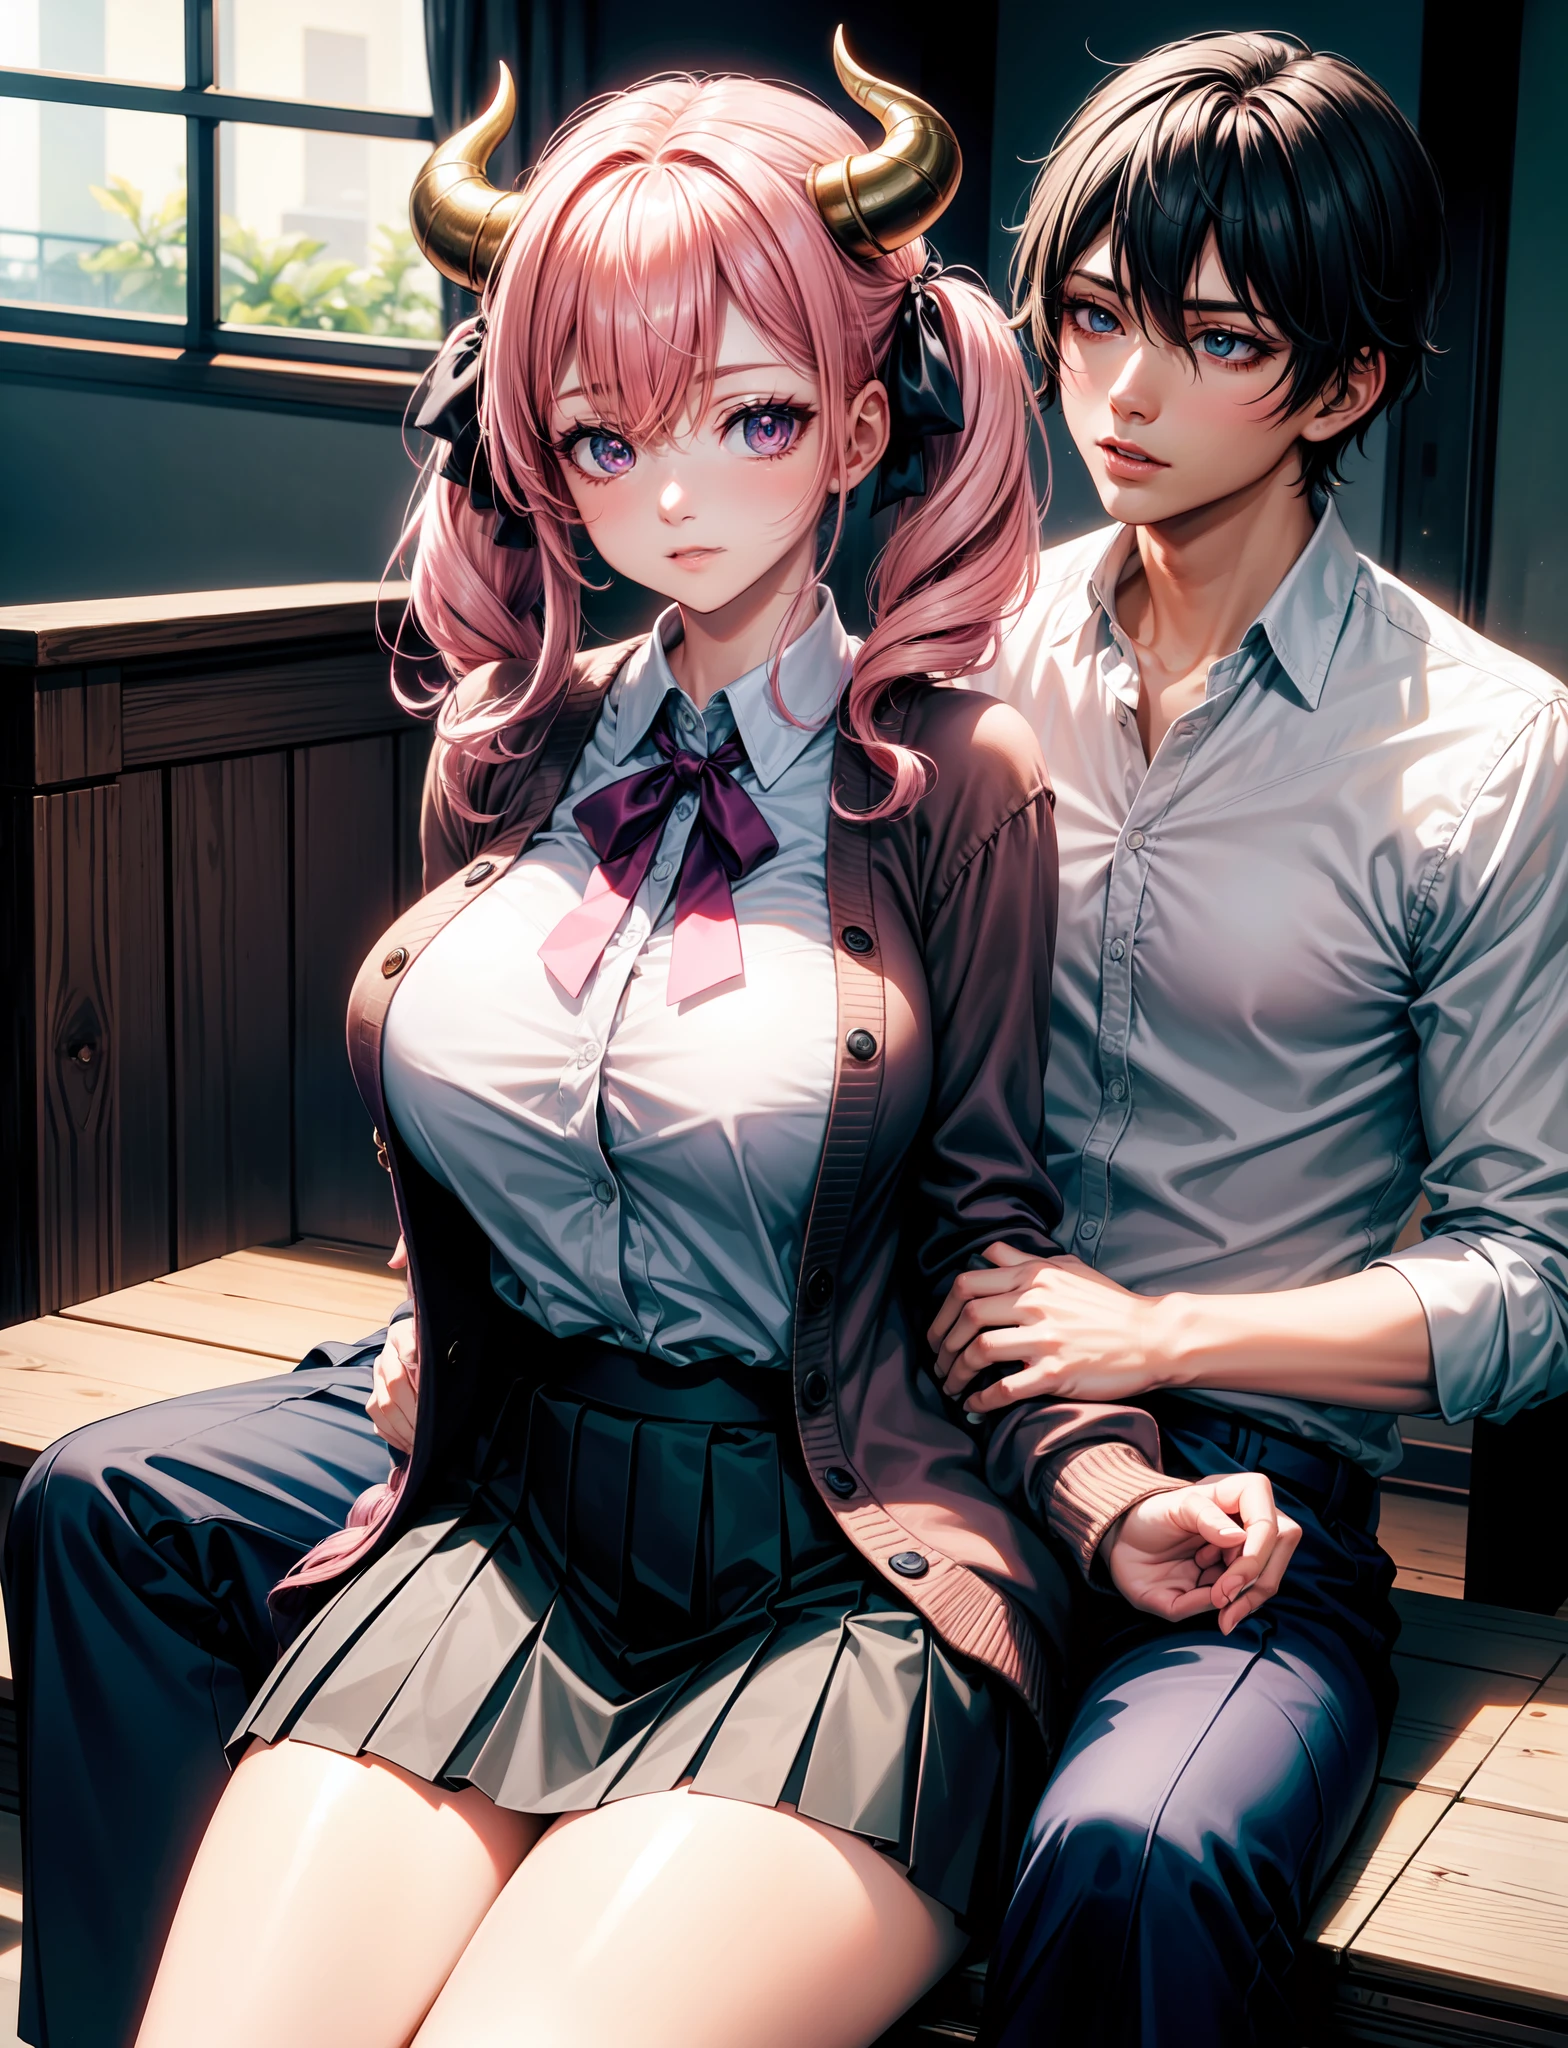 4k,  ,Lens flare, pink hair ,mascara, eyeliner, god rays, 4k, 8k, best quality, masterpiece, hyper detailed, intricate detail, 1boy, 1 girl,  detailed, Detailed fuchsia hair ++, detailed pink eyes ++,  raytracing, perfect shadow, highres, enhanced eyes,  huge breasts, horns, seductive,  hyper detailed, Dressed in a pleated skirt, a button-up blouse, and knee-high socks, your anime girl exudes a scholarly yet fashionable aura. A cardigan and loafers add a touch of sophistication. Your anime girl adds large ribbon bows at the base of each twin tail. This style is both adorable and attention-grabbing, highlighting her playful nature. she is using a boy as a chair, sitting on a boy, she is sitting on someone, sitting on a man